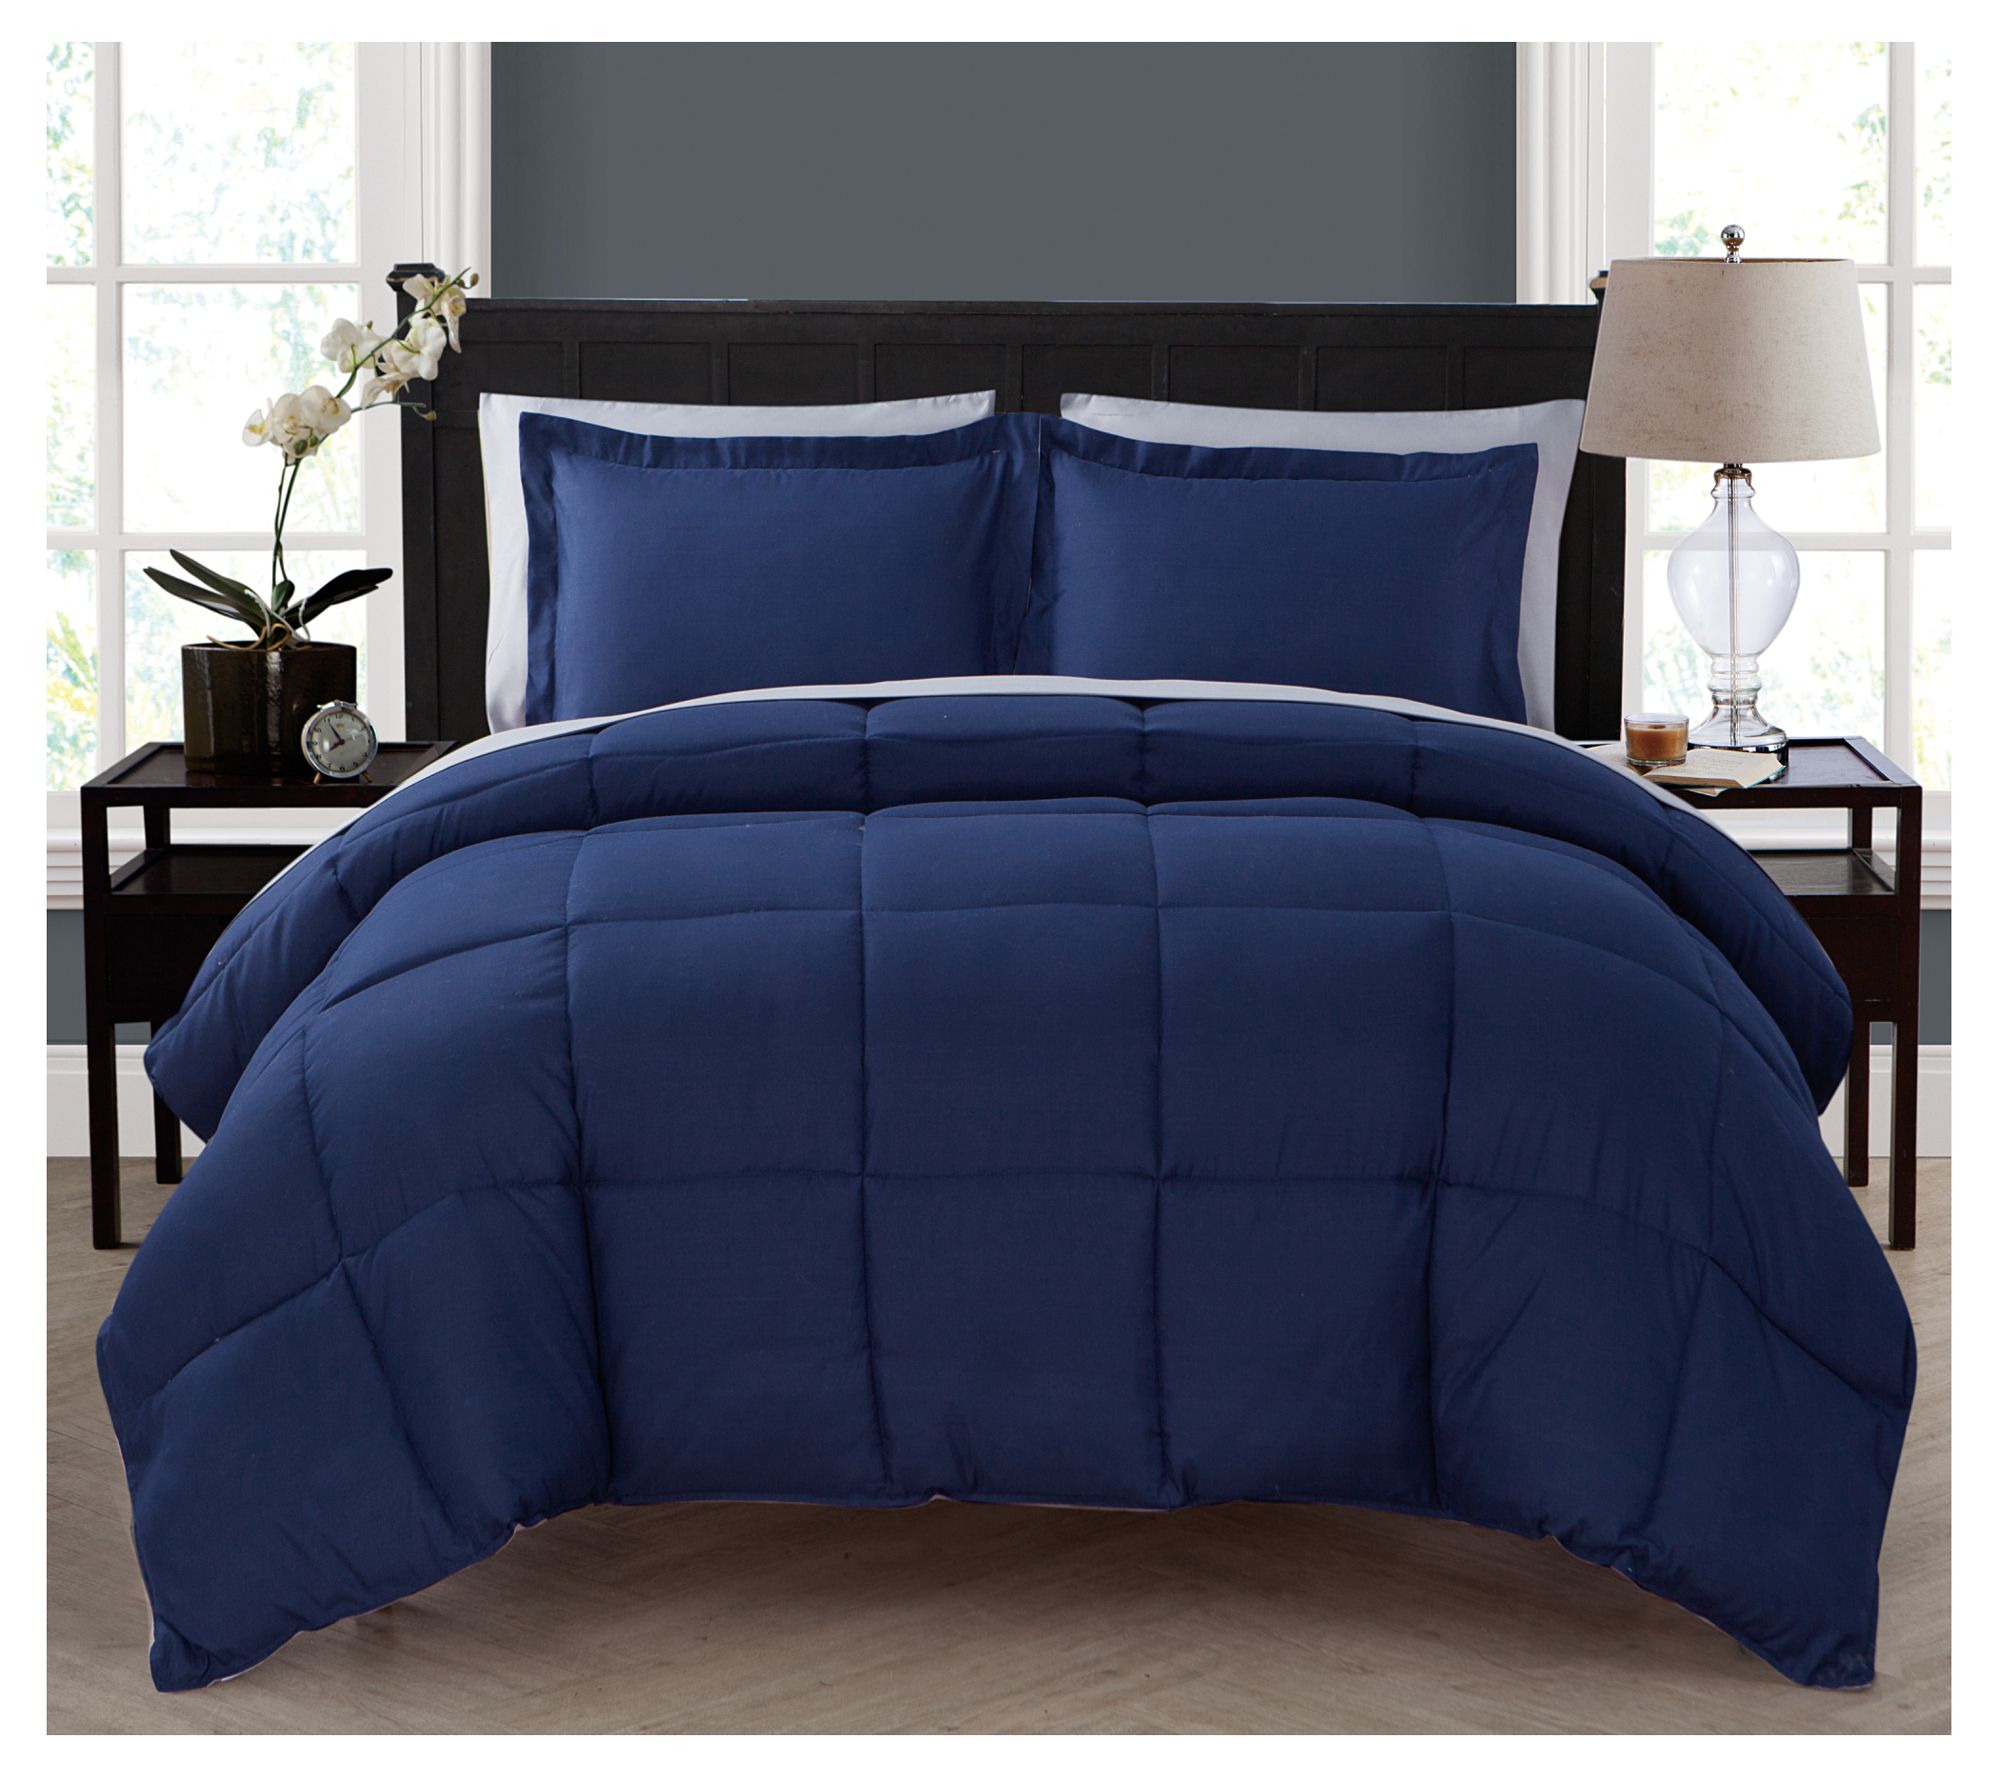 VCNY Lincoln Reversible Bed-in-a-Bag Comforter Set, King - QVC.com